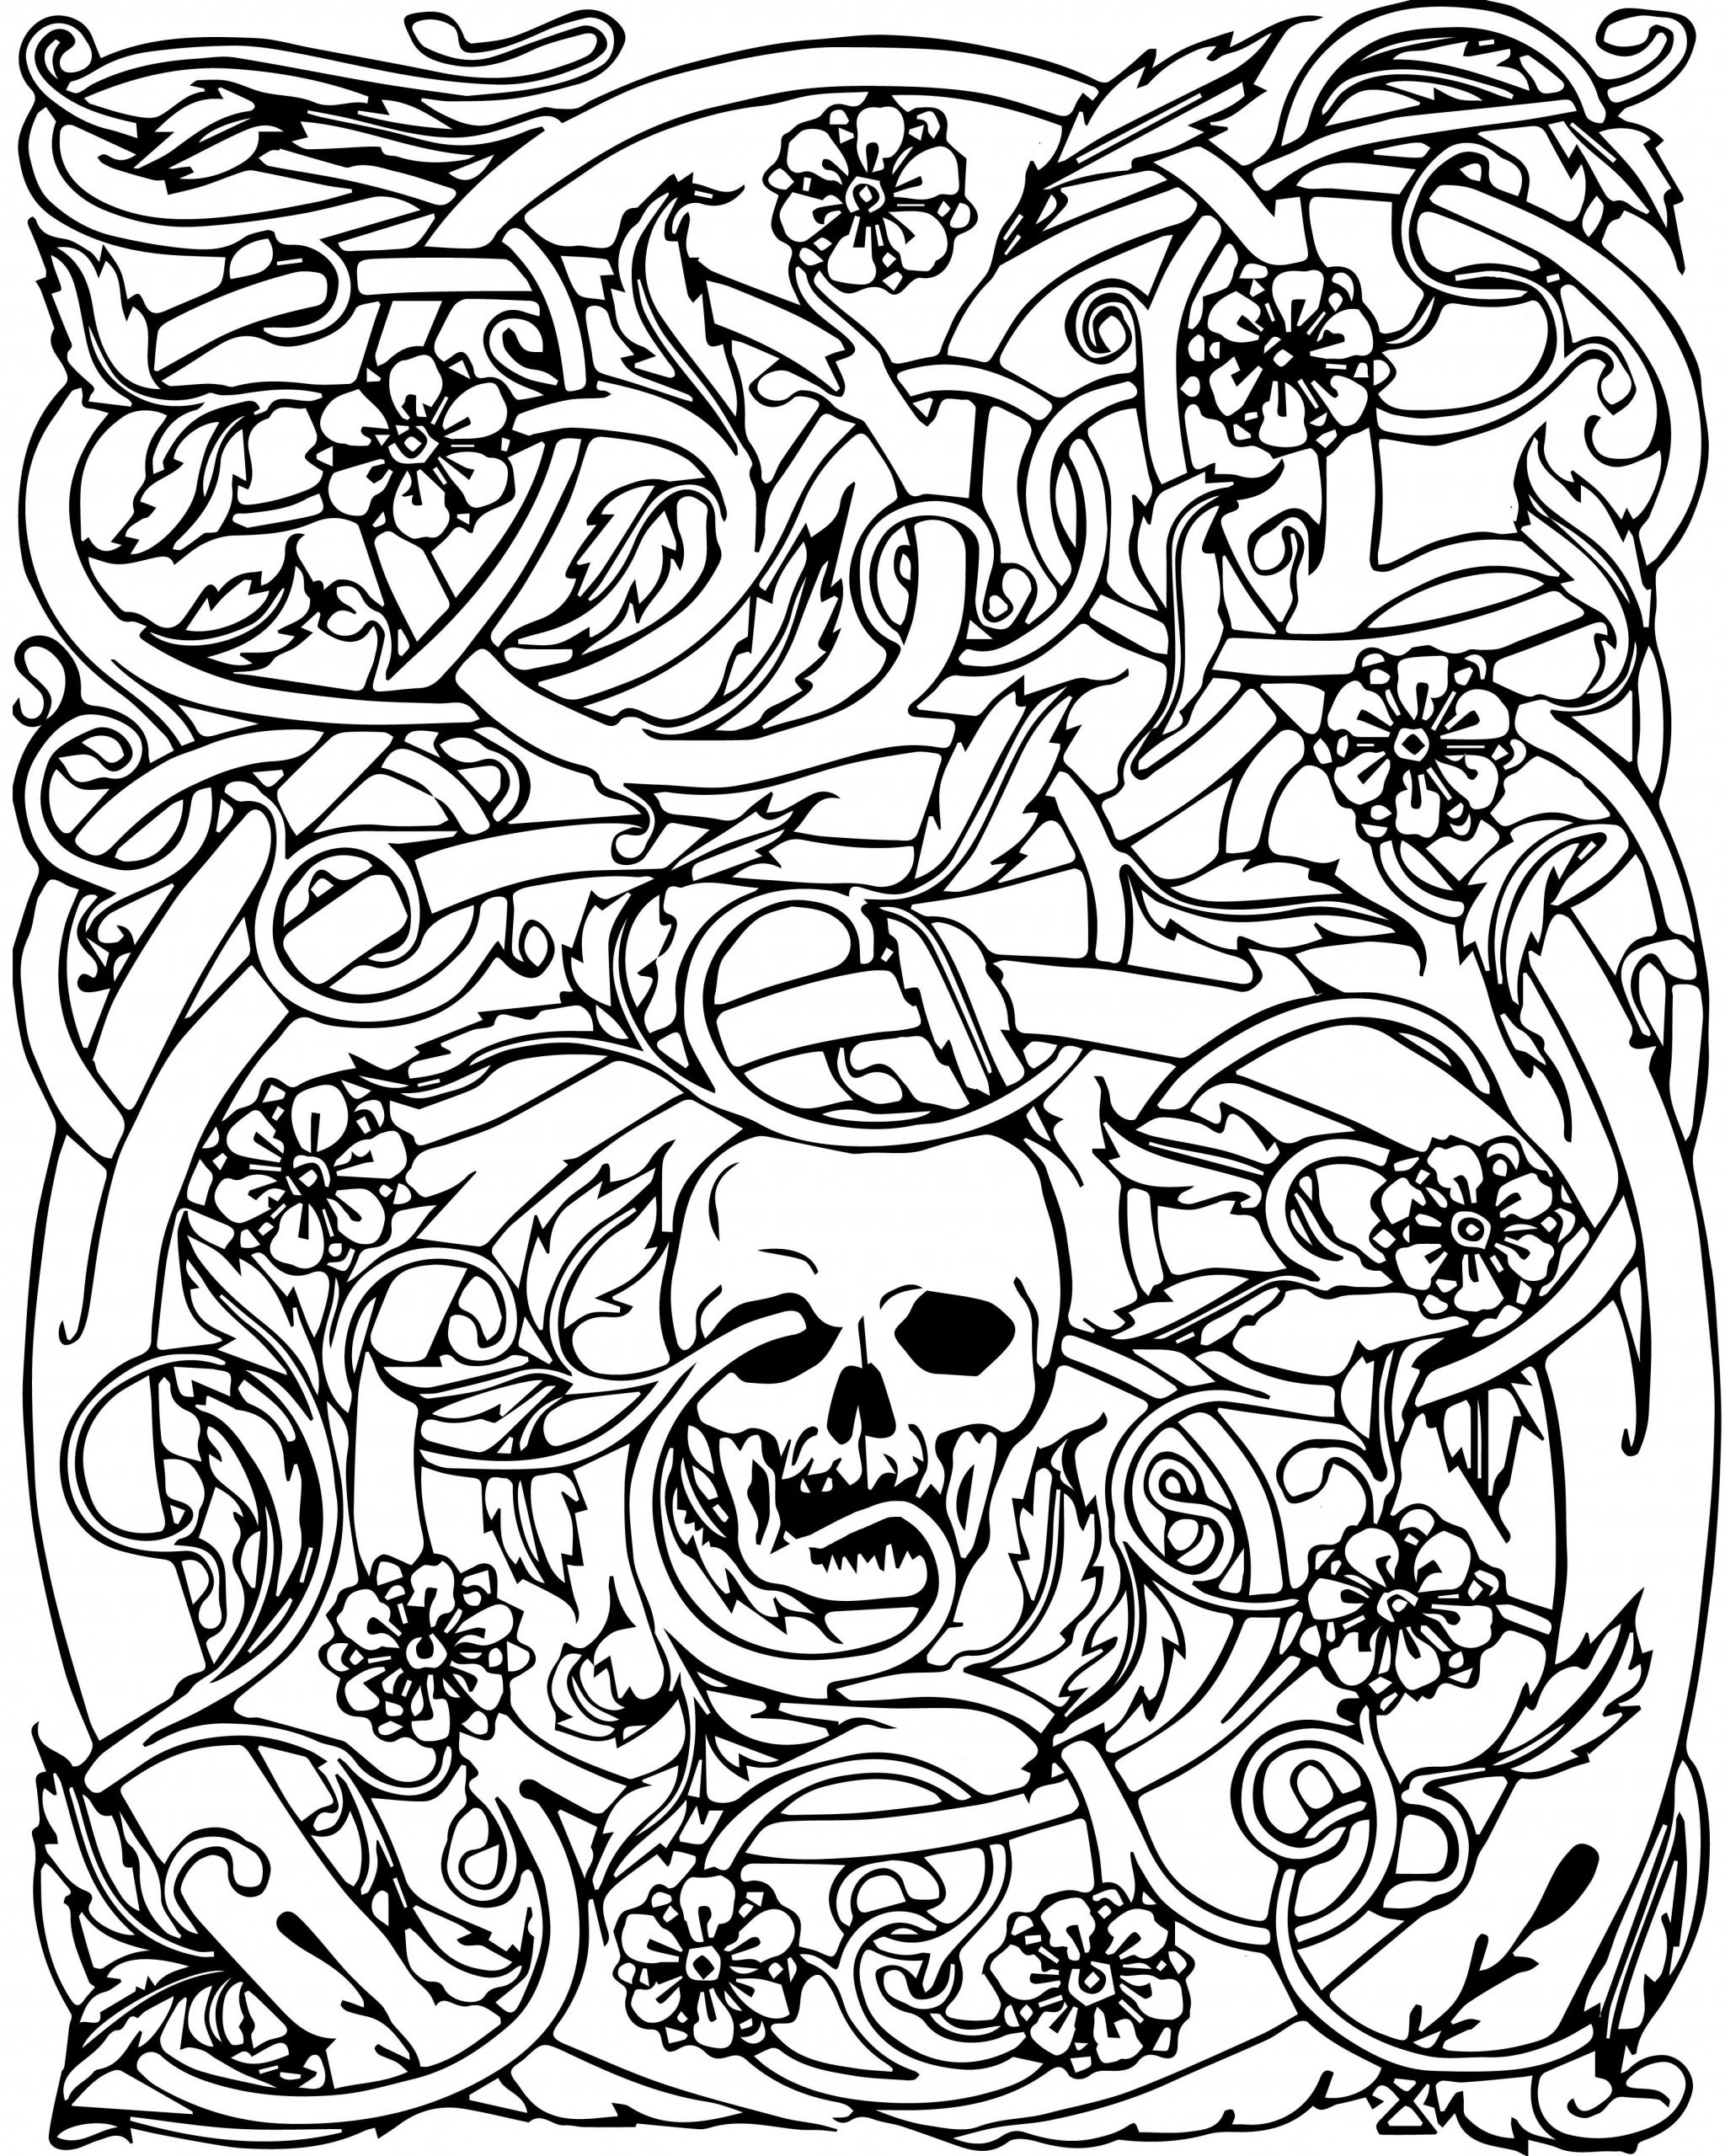 Free Adult Coloring Book Pdf
 free adult coloring pages pdf